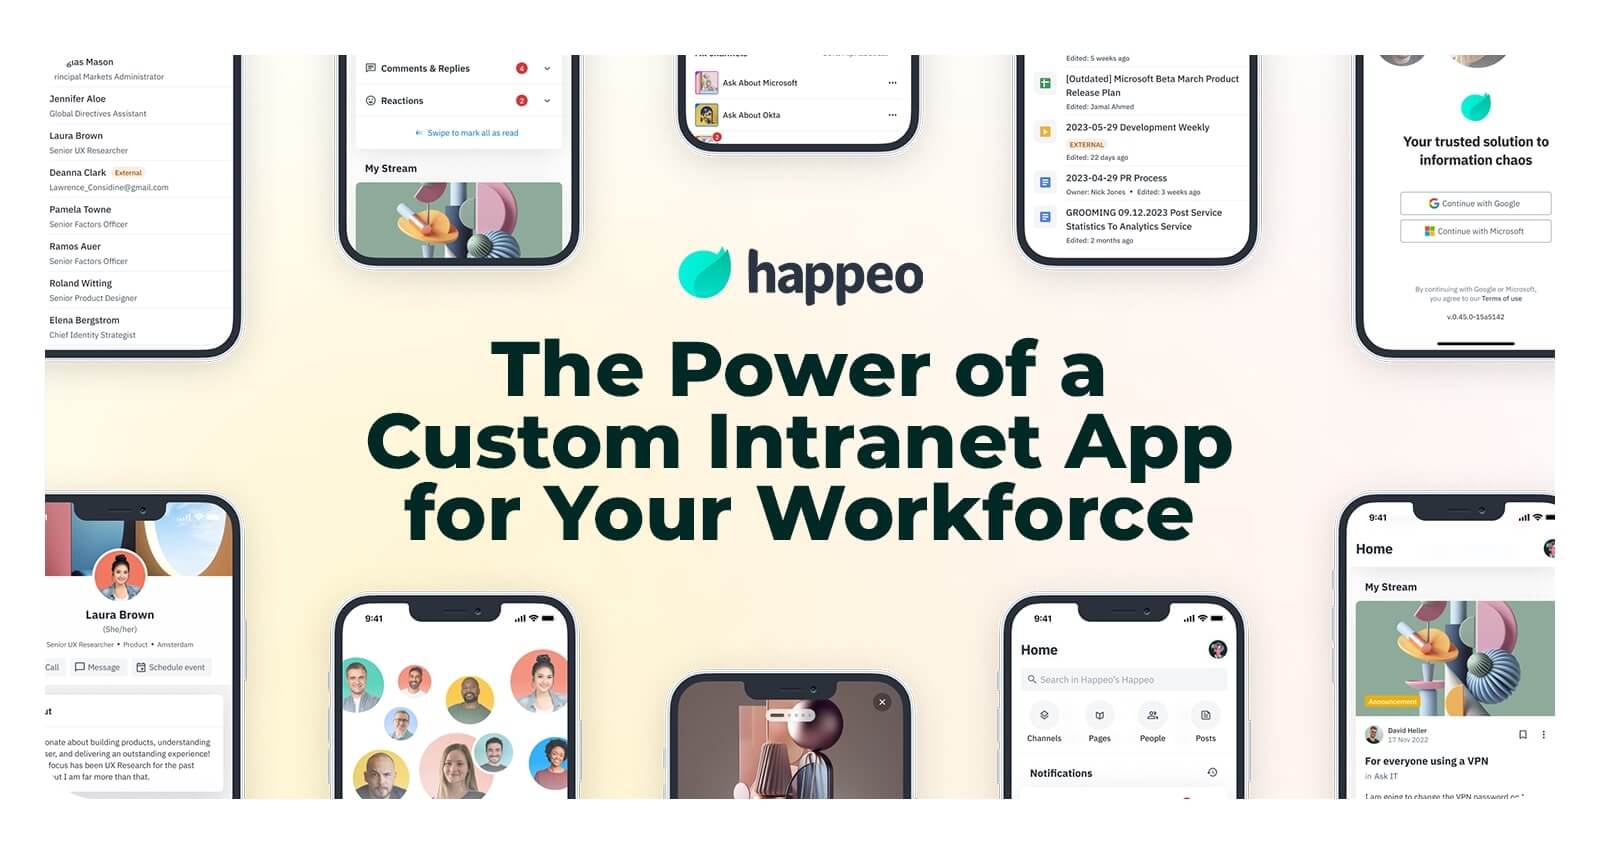 The Power of a Custom Intranet App for Your Workforce